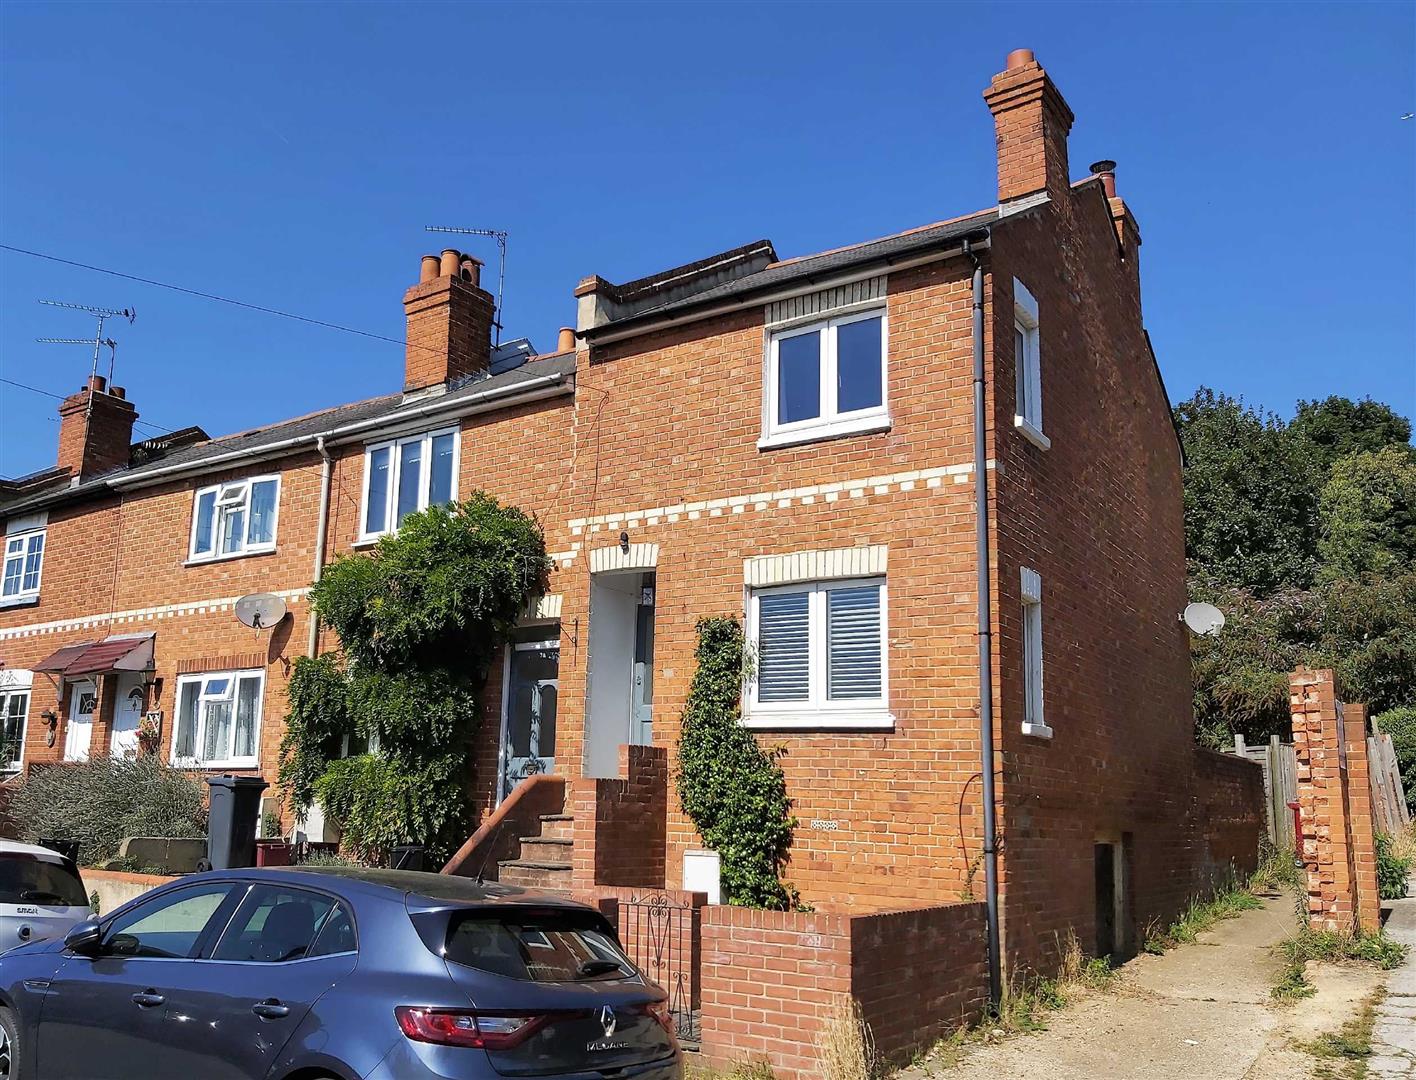 Oxford Street Caversham house for sale in Reading